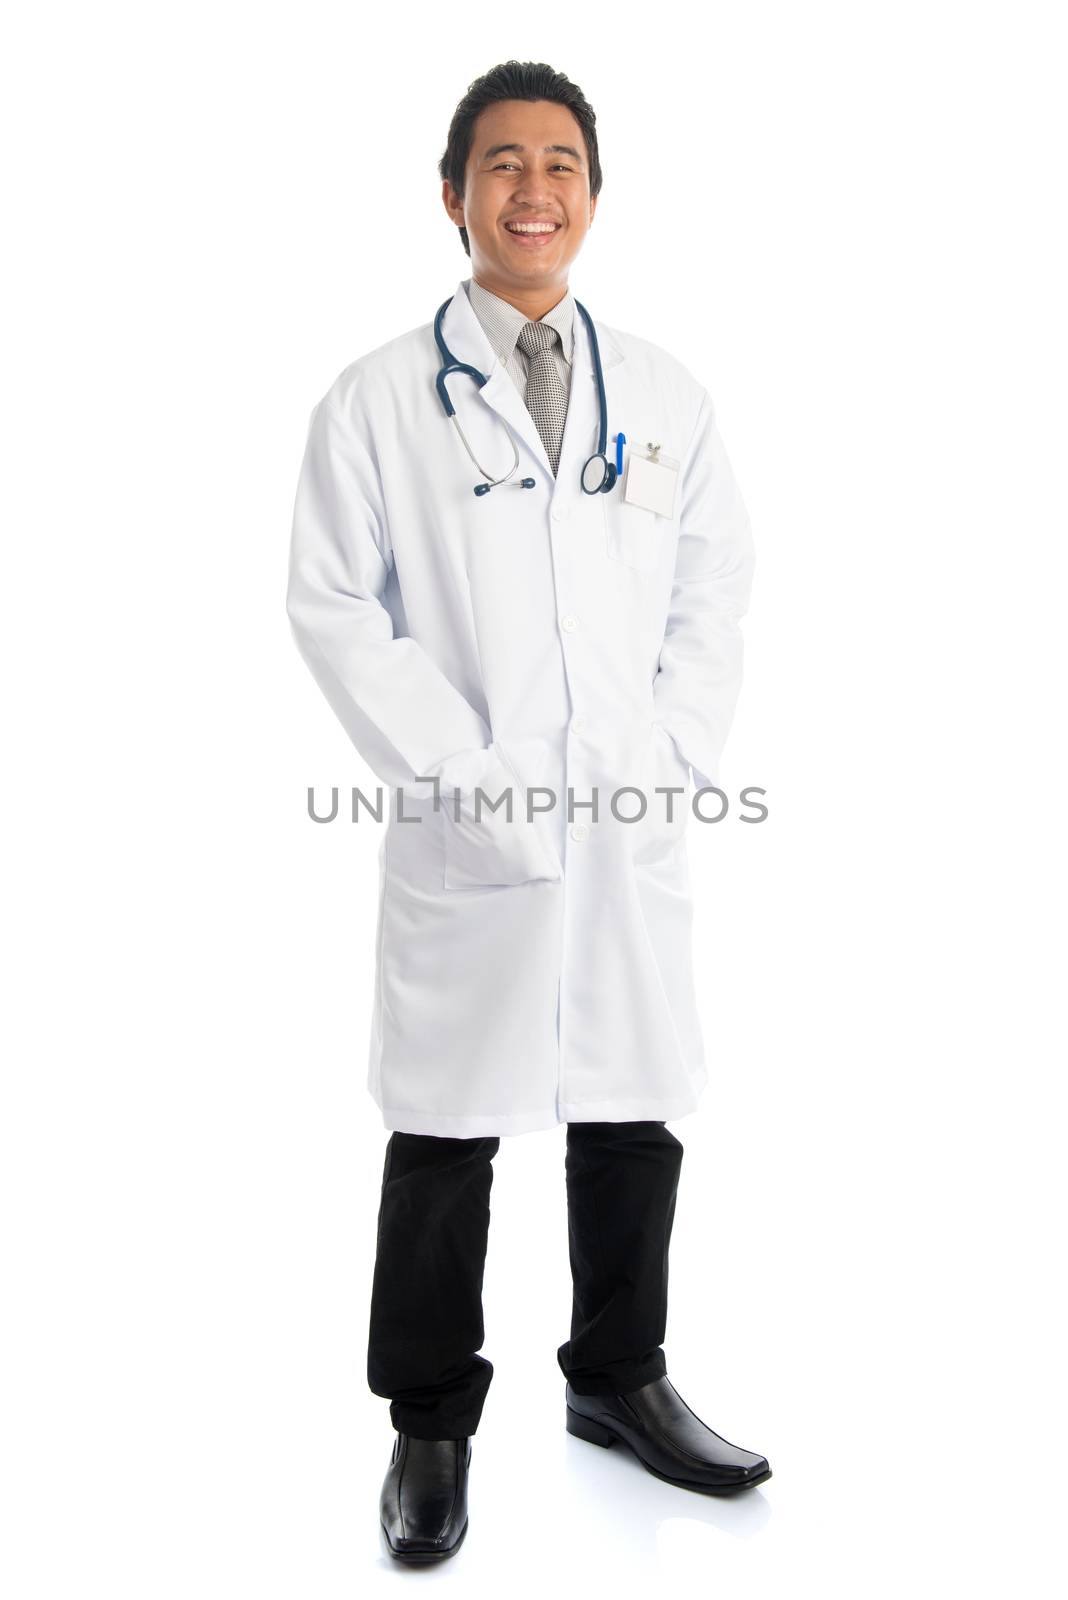 Full length front view attractive young male Southeast Asian medical doctor standing isolated on white background.